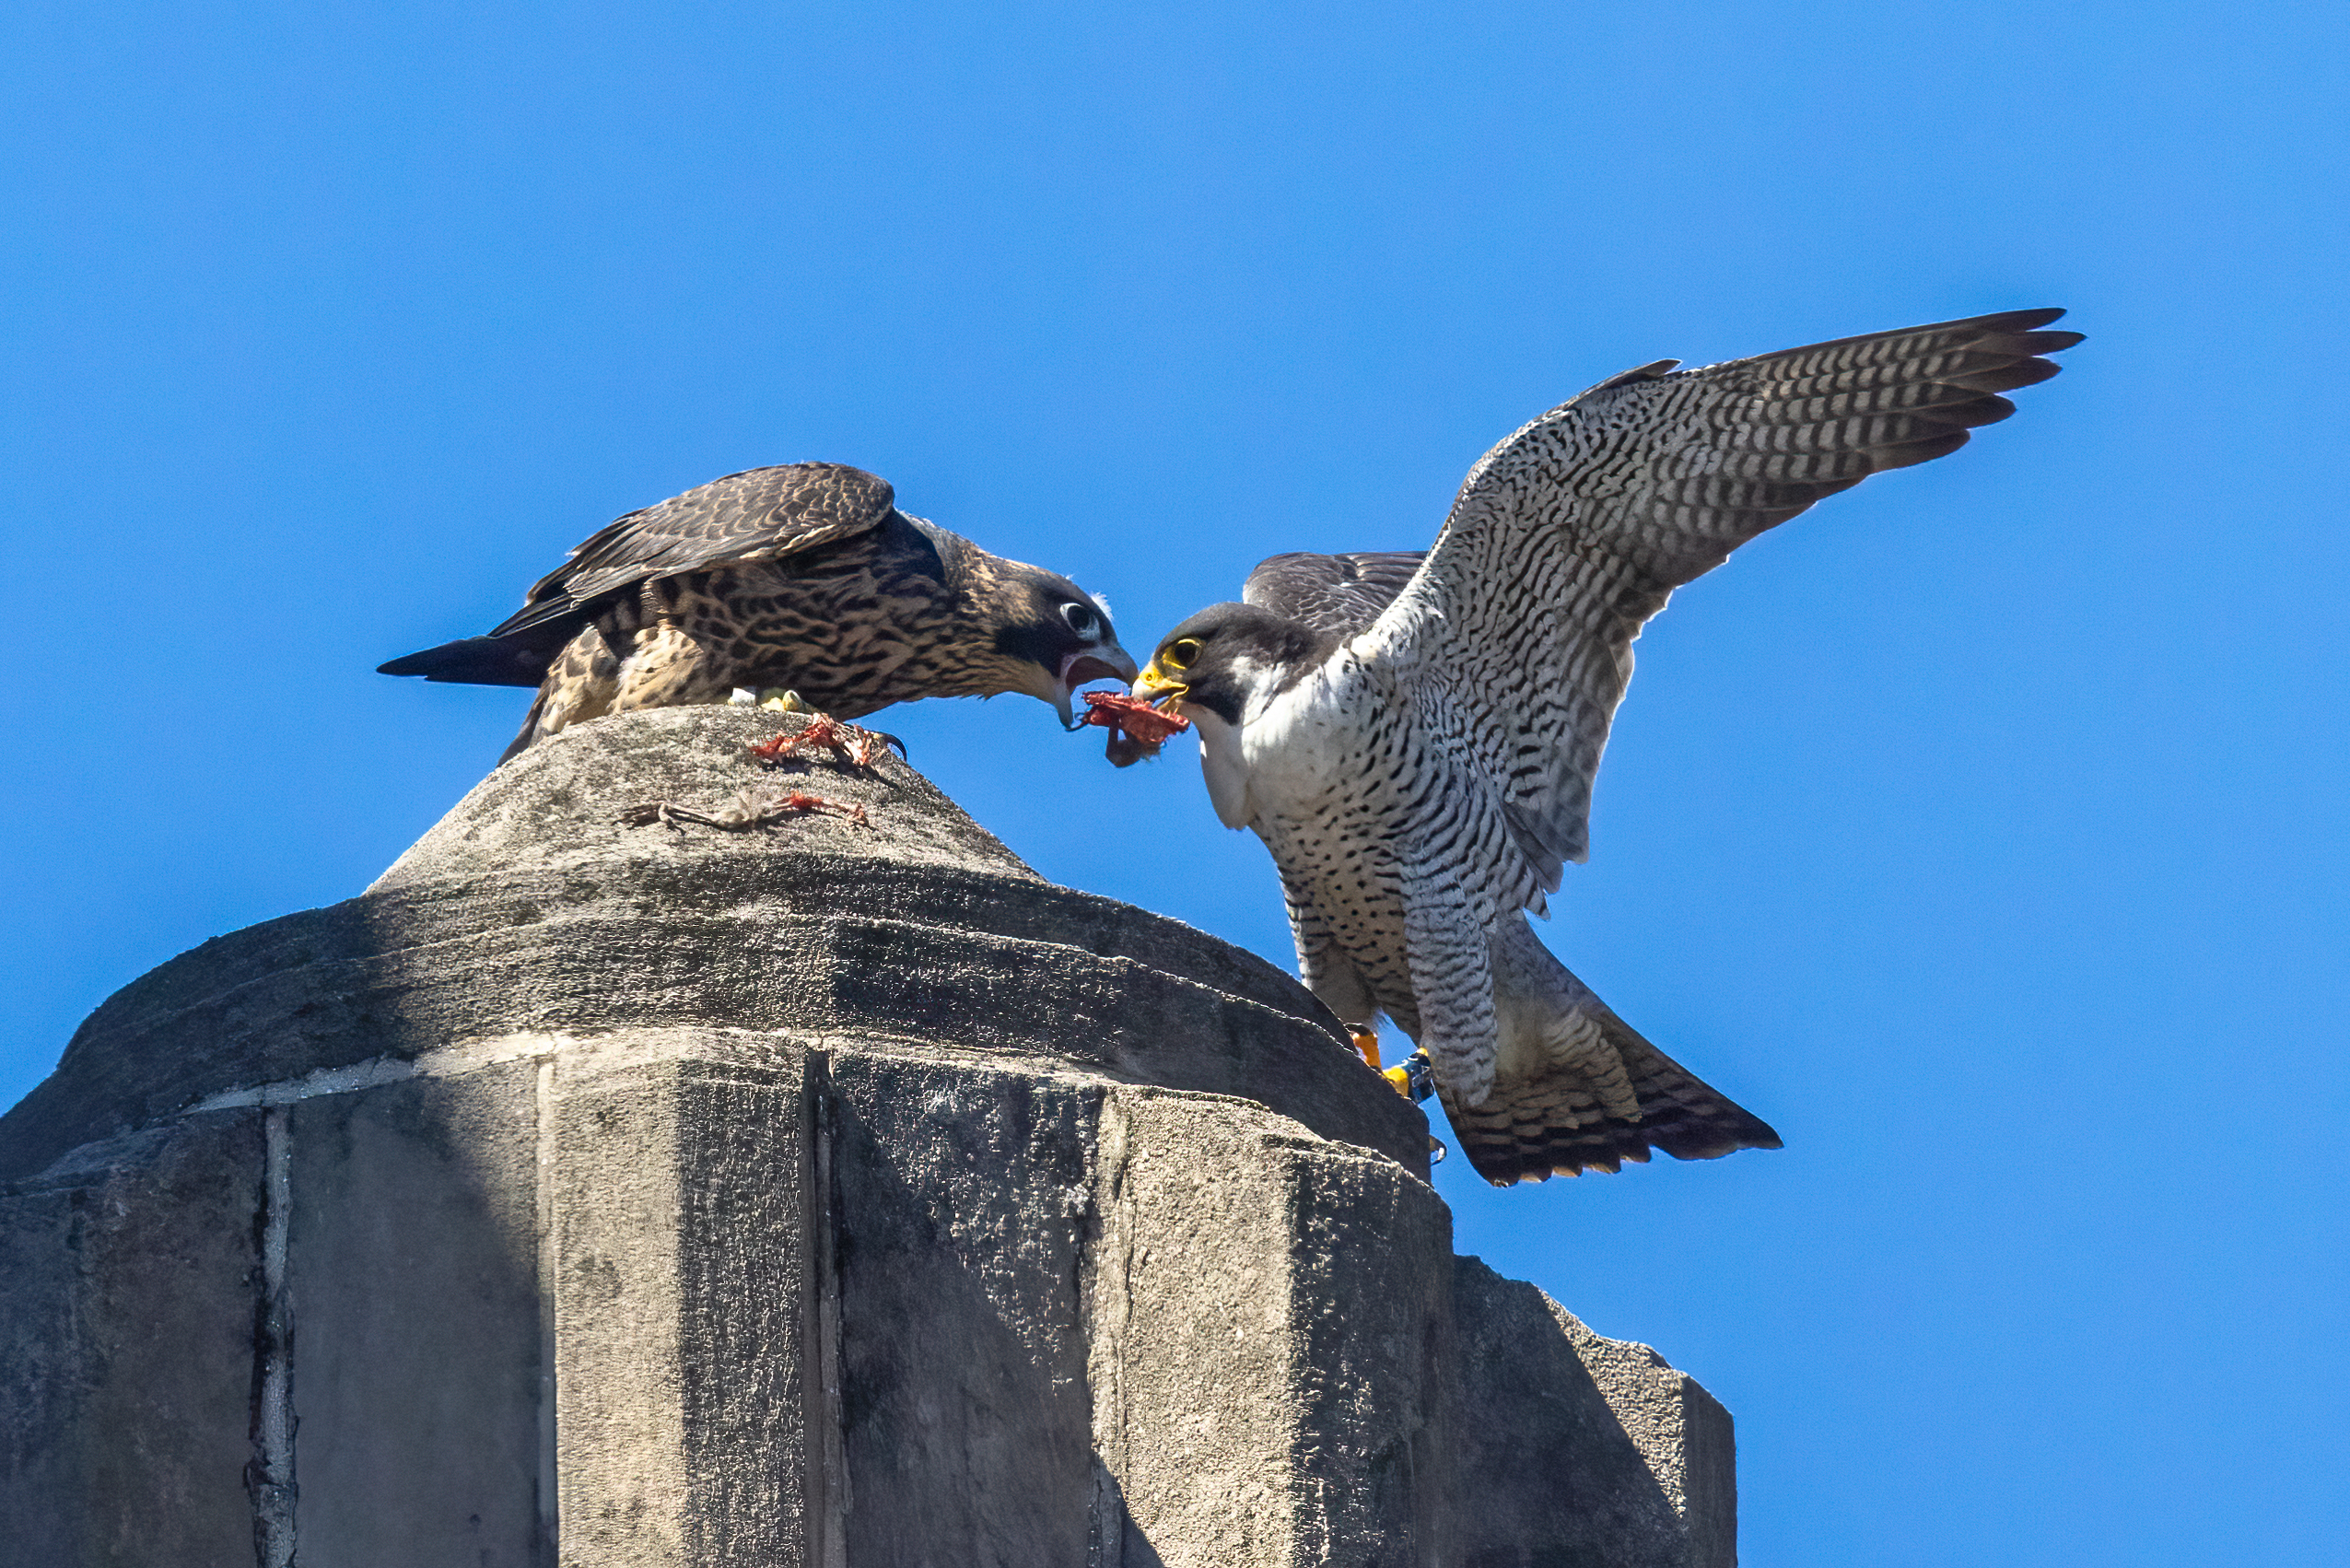 Newly hatched peregrine falcons take tricky first flights  